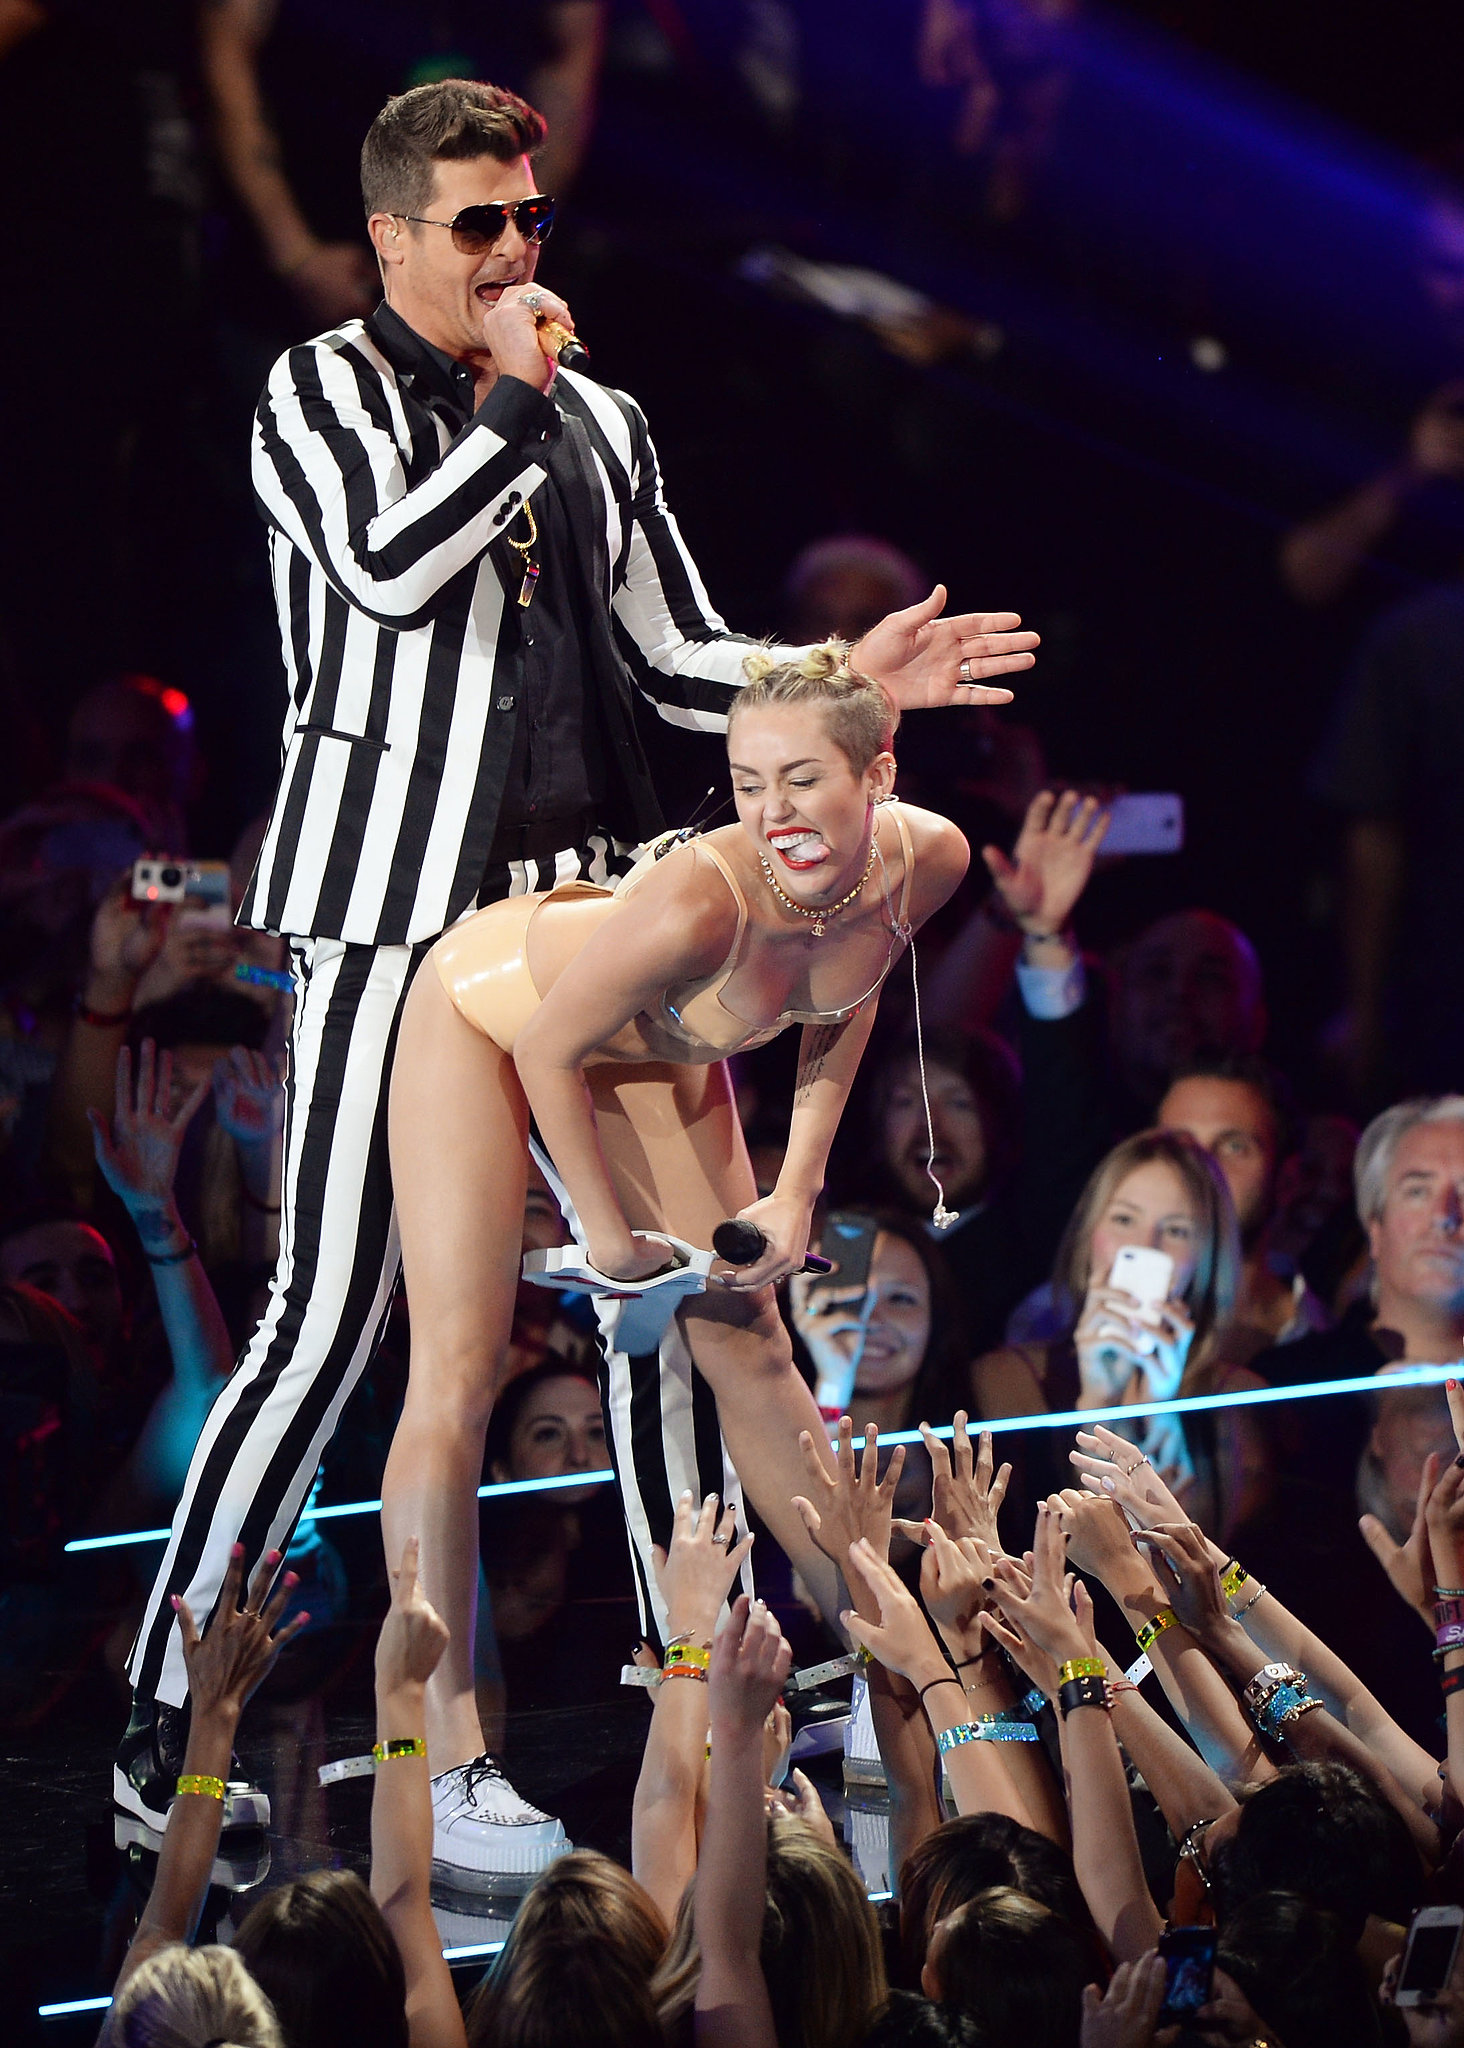 Miley-Cyrus-joined-Robin-Thicke-stage-performance.jpg